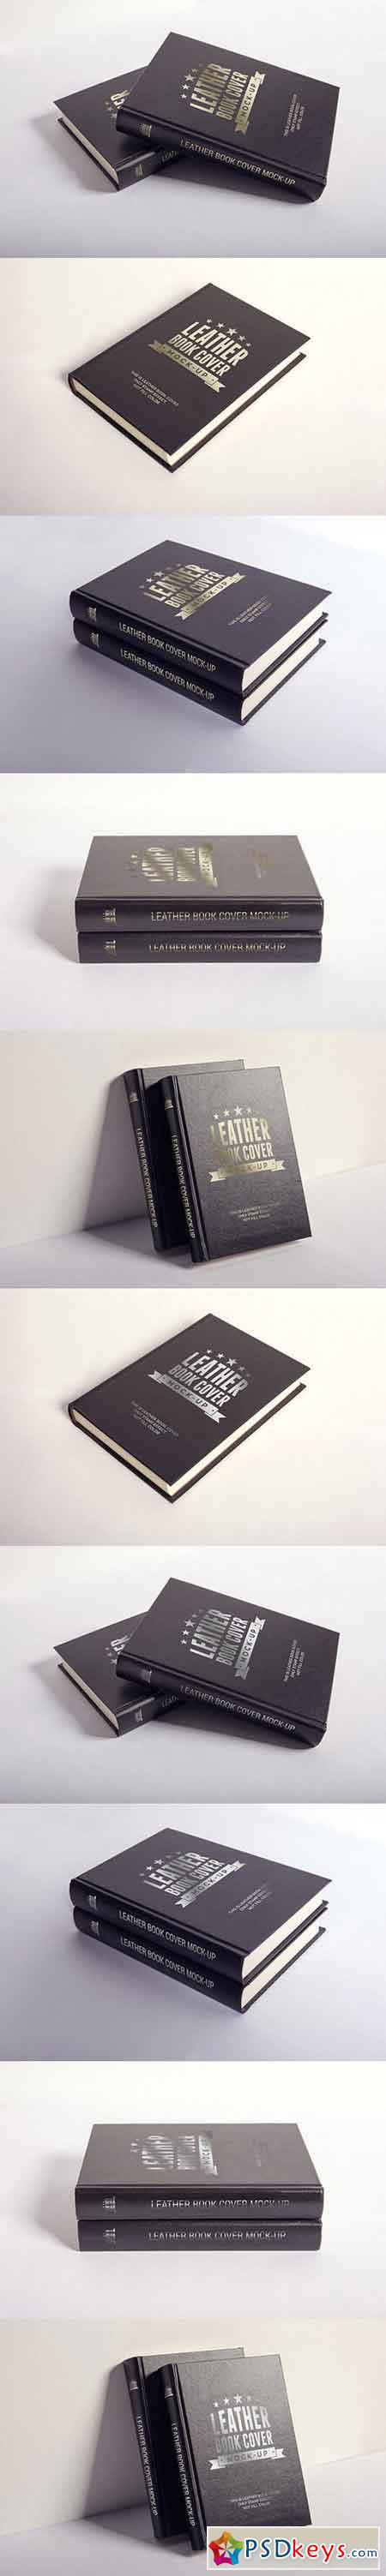 LEATHER BOOK COVER MOCK-UP 1420568